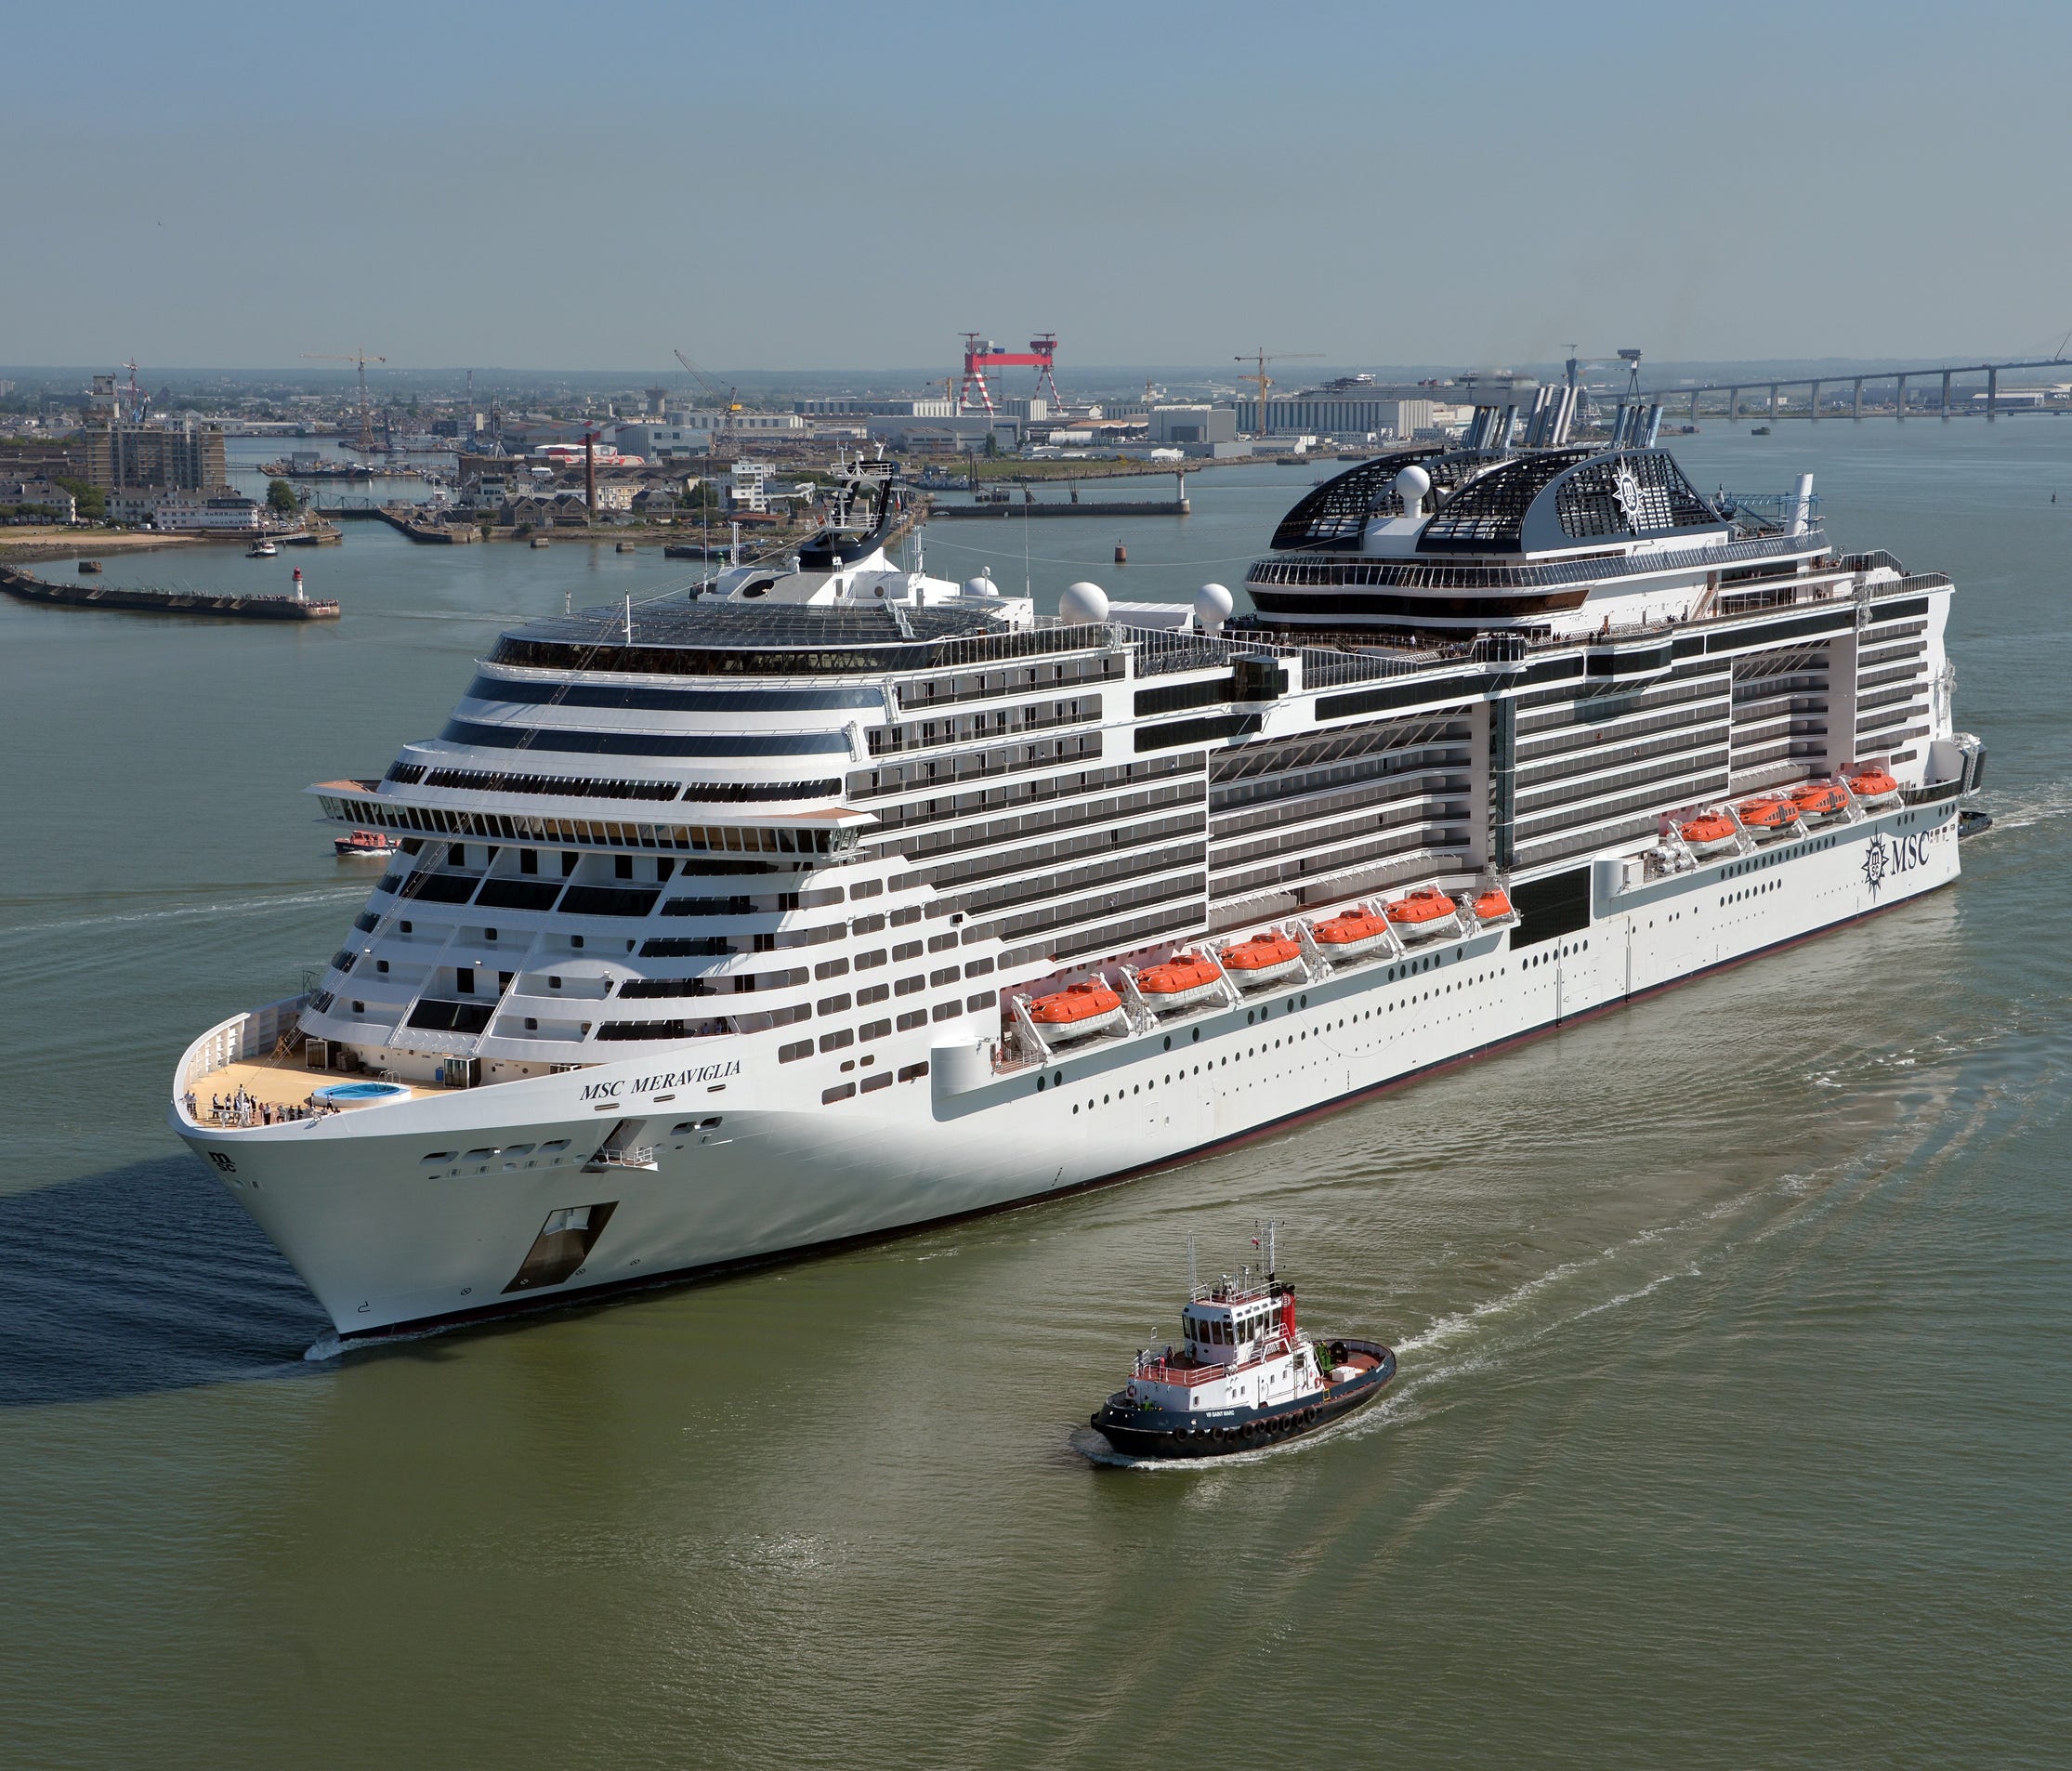 MSC Cruises' 171,598-ton MSC Meraviglia sails from the STX France shipyard in Saint-Nazaire, France in May 2017.